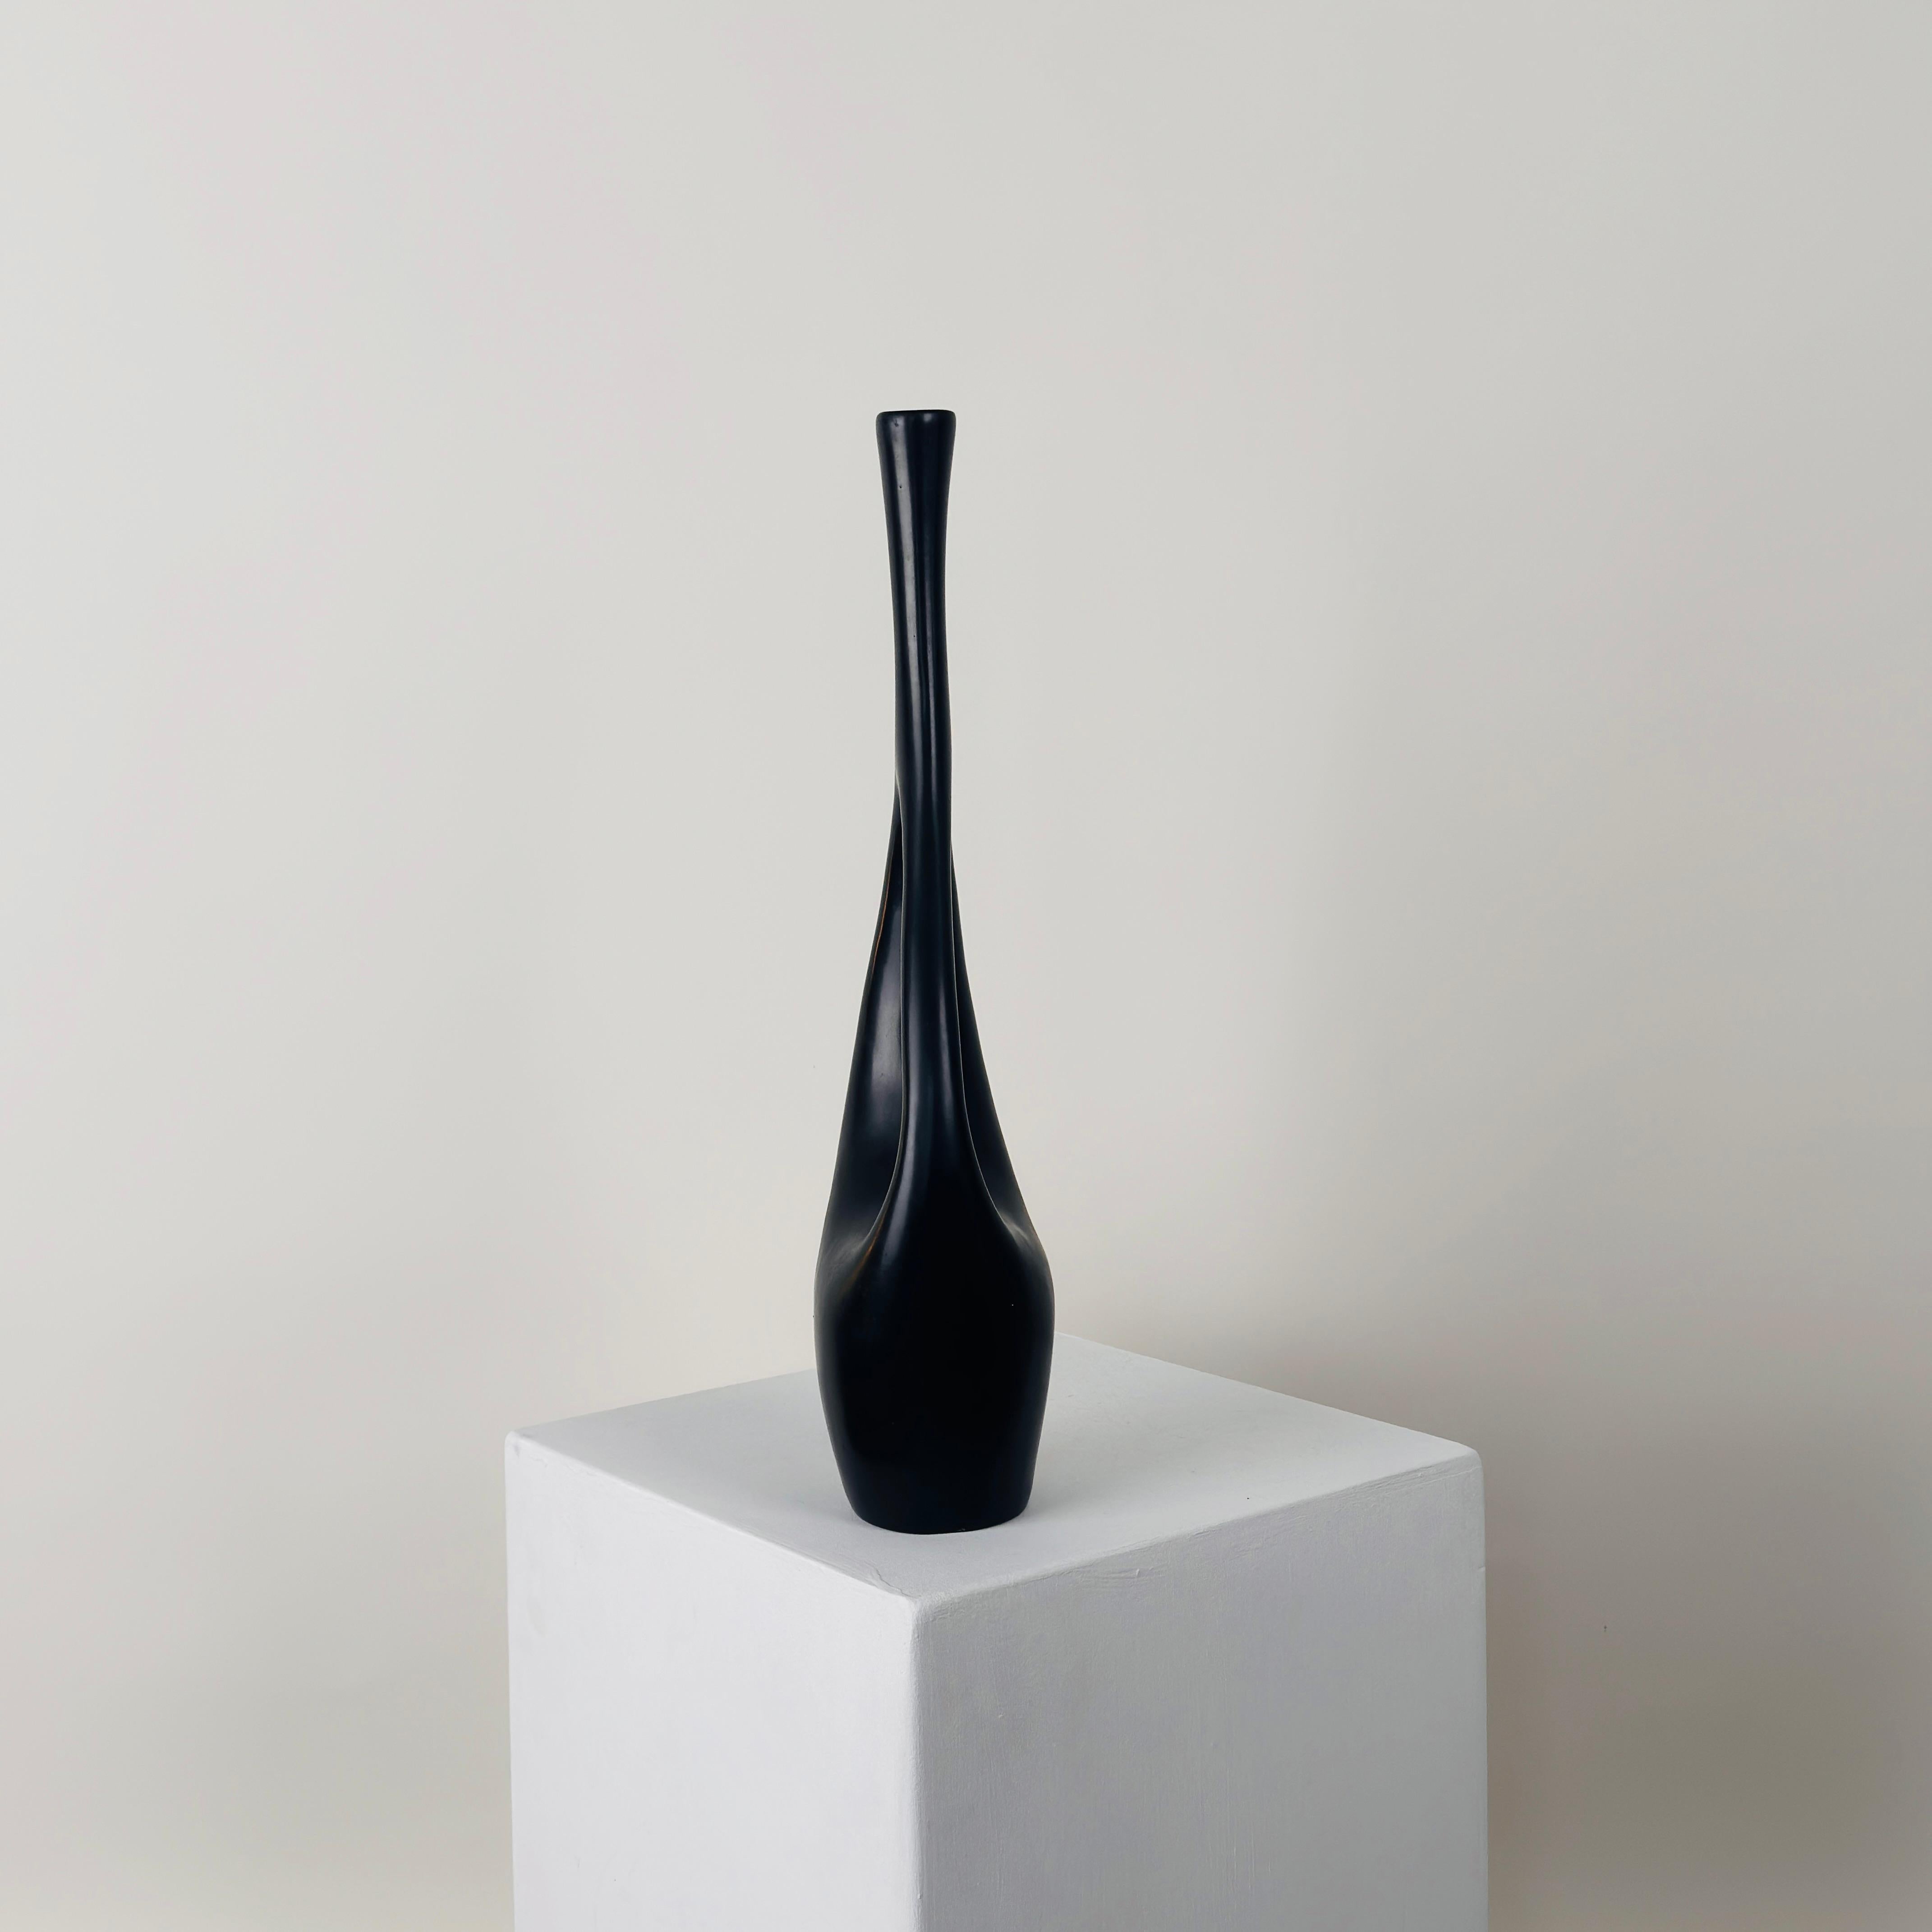 Mid-20th Century Large soliflore vase with black ceramic handle by Jean André Doucin, circa 1950.